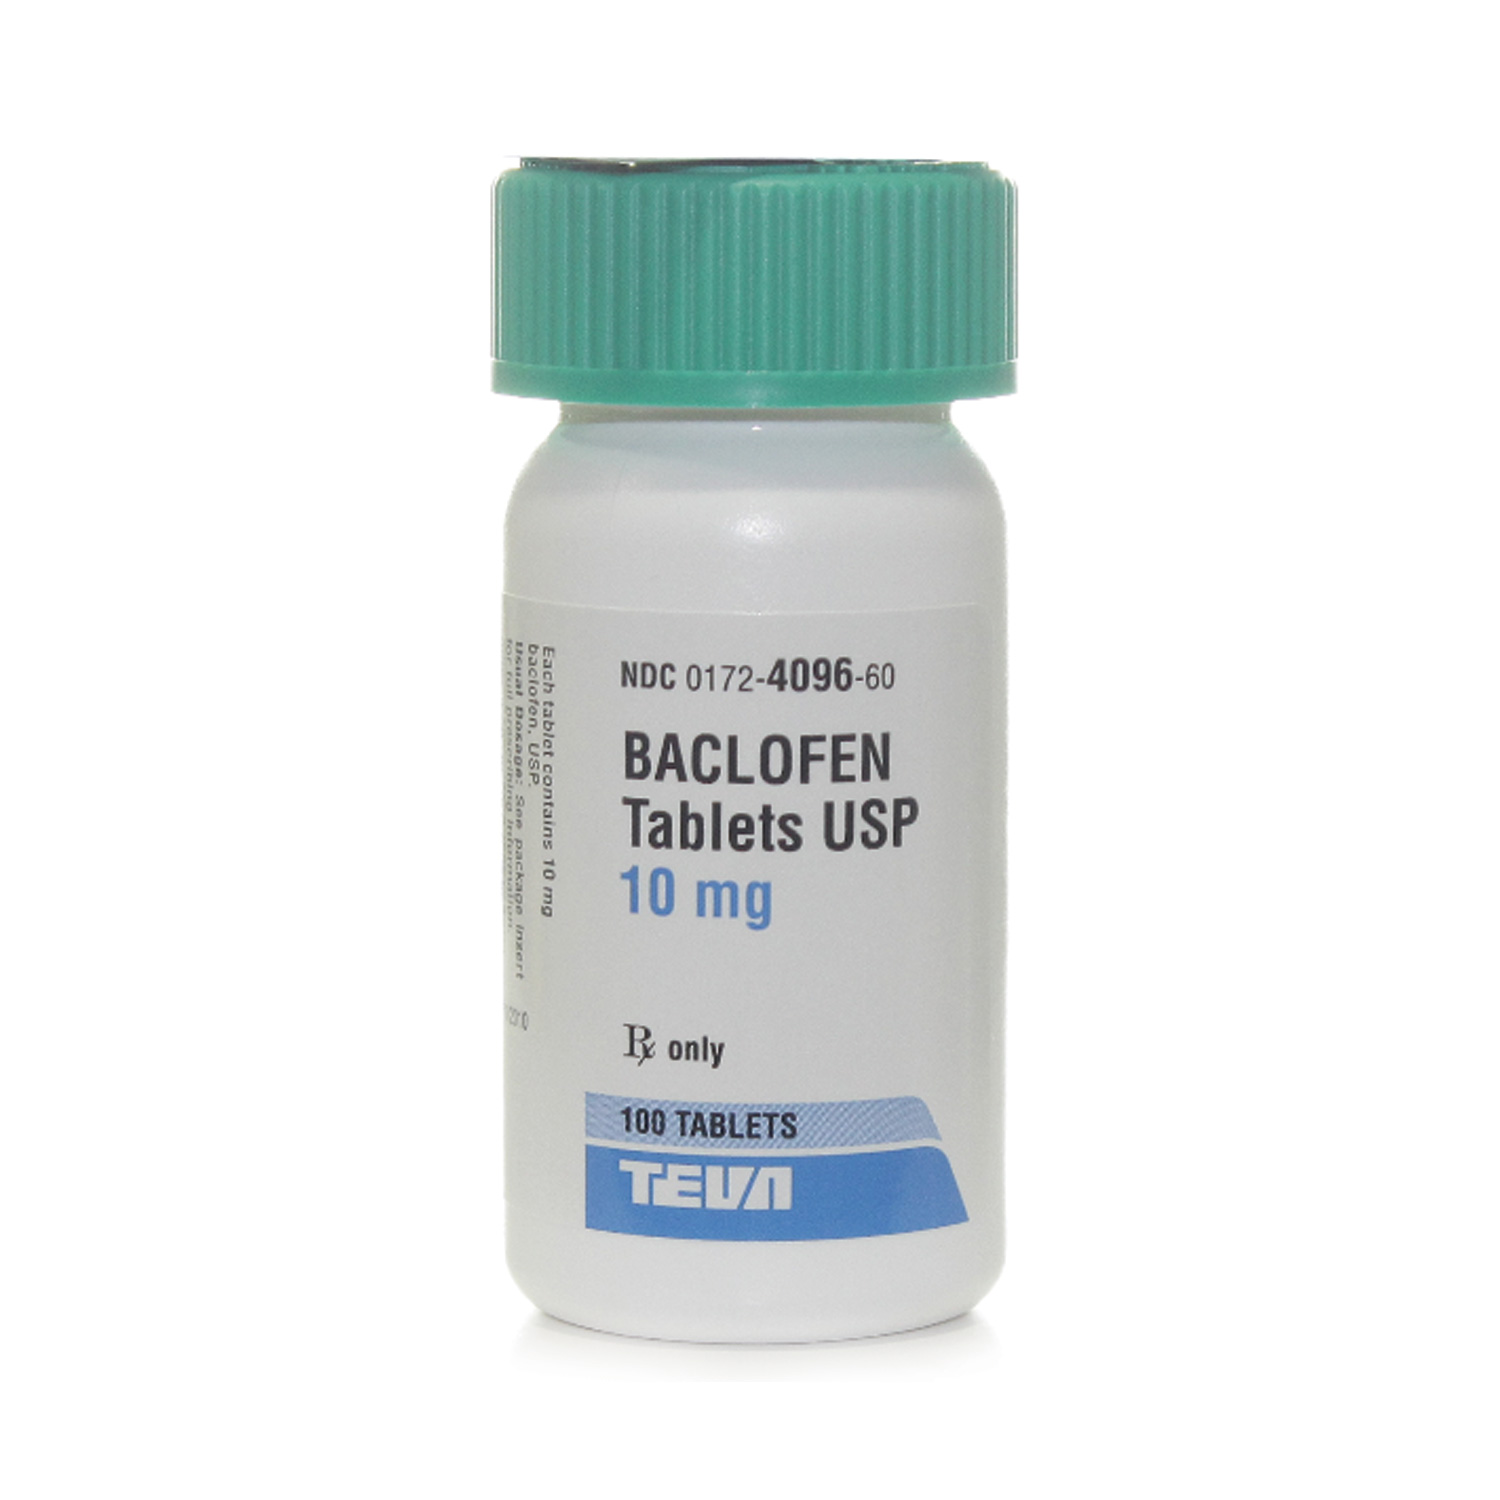 Baclofen 10mg, 100 Count Tablets - 100/Bottle